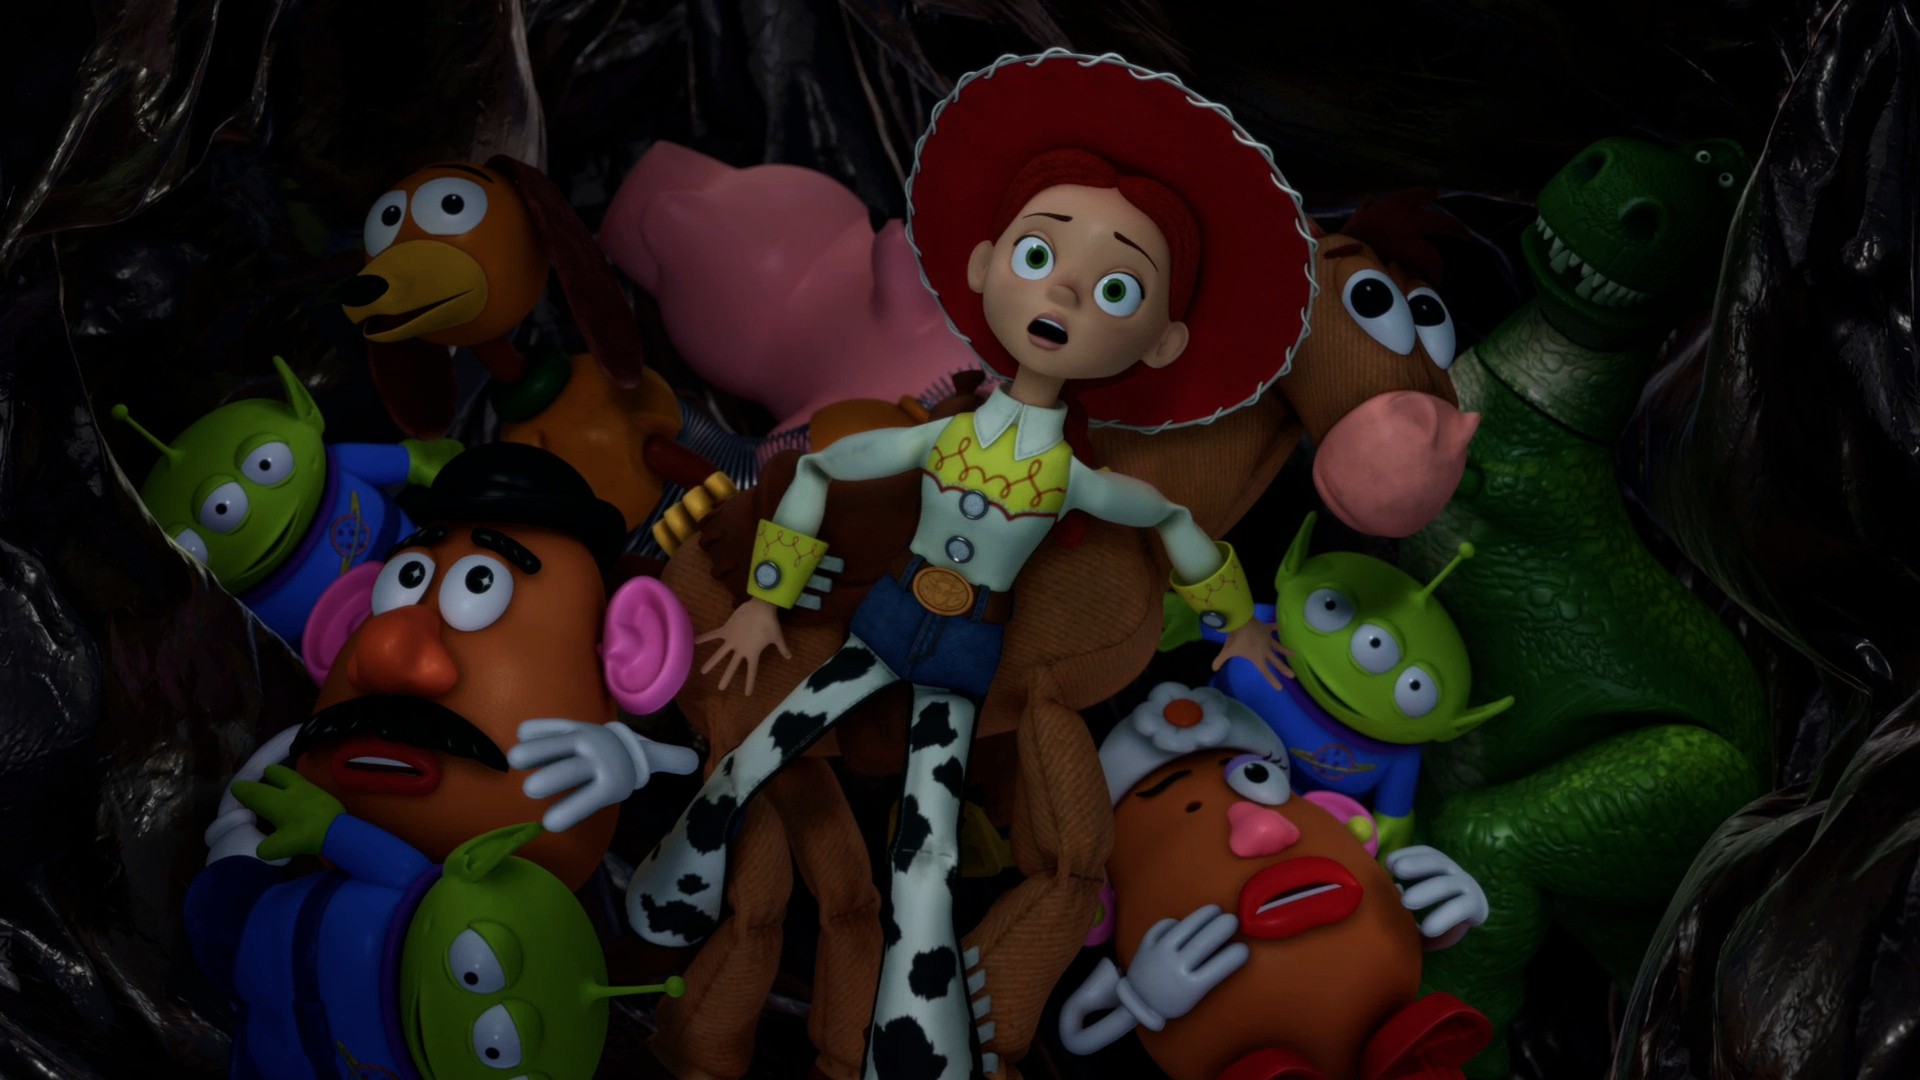 General 1920x1080 movies Toy Story animated movies Toy Story 3 Pixar Animation Studios Jessie (Toy Story)